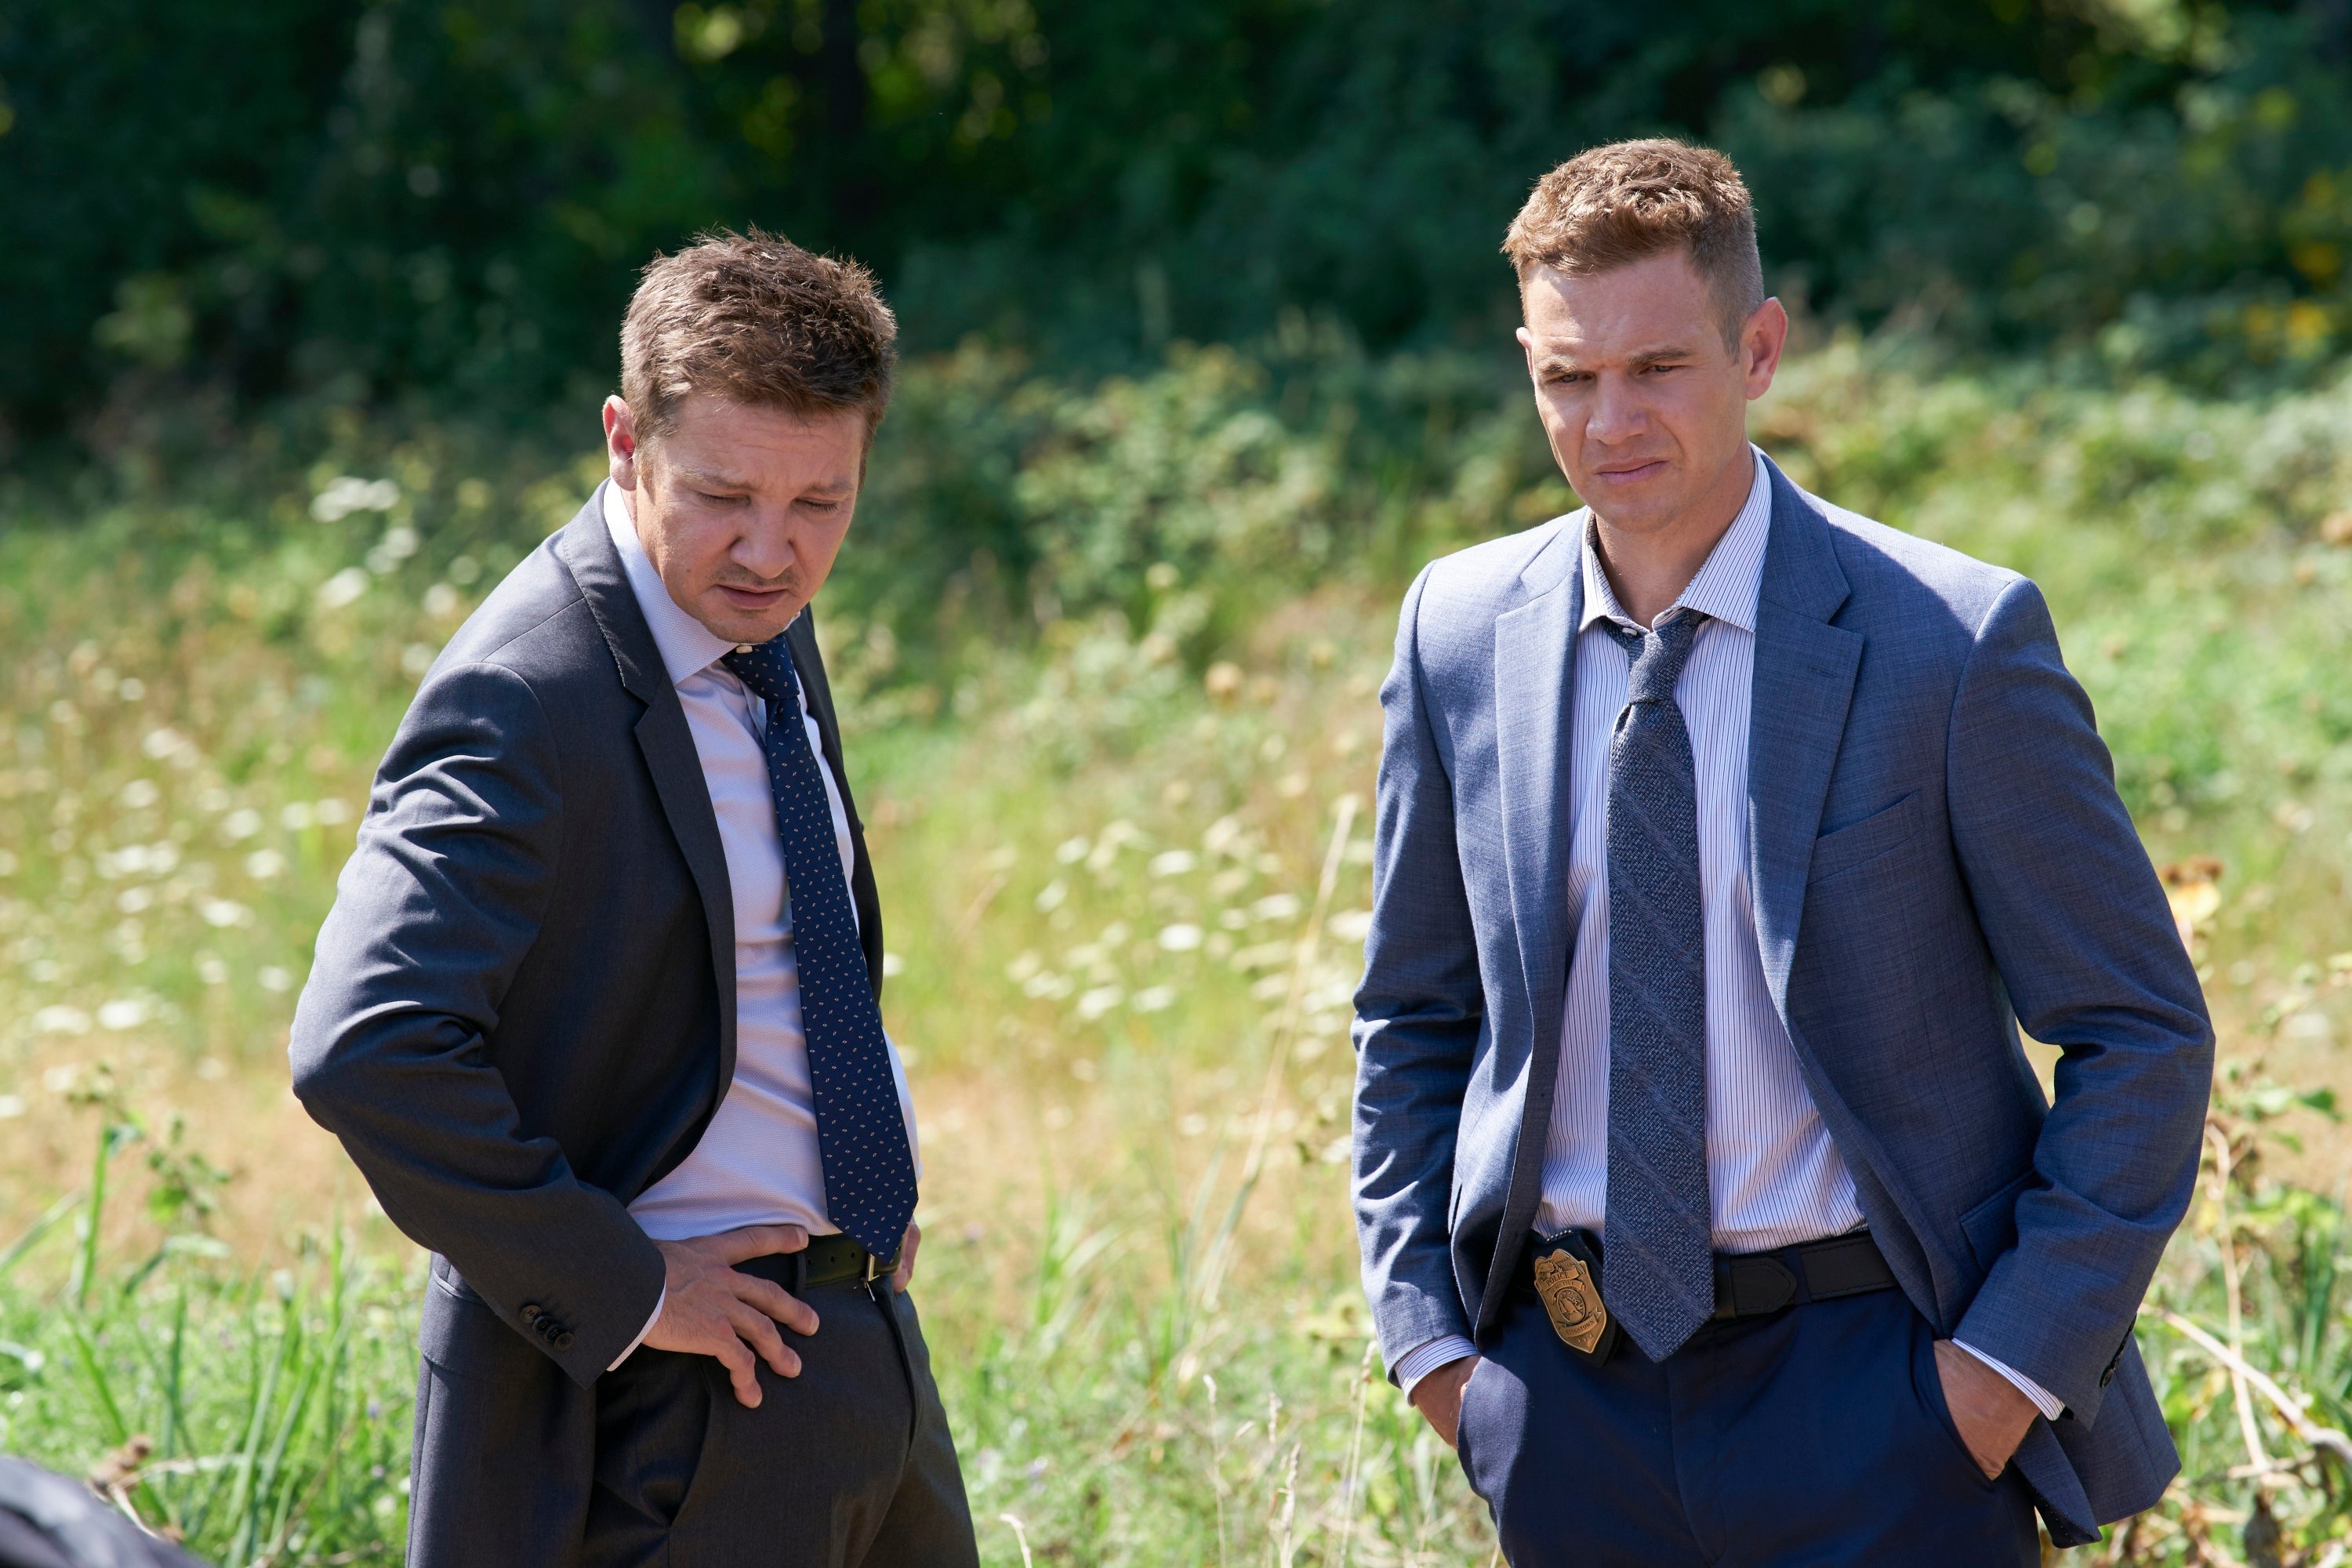 'Mayor of Kingstown' cast members Jeremy Renner and Taylor Handley as Mike and Kyle McLusky